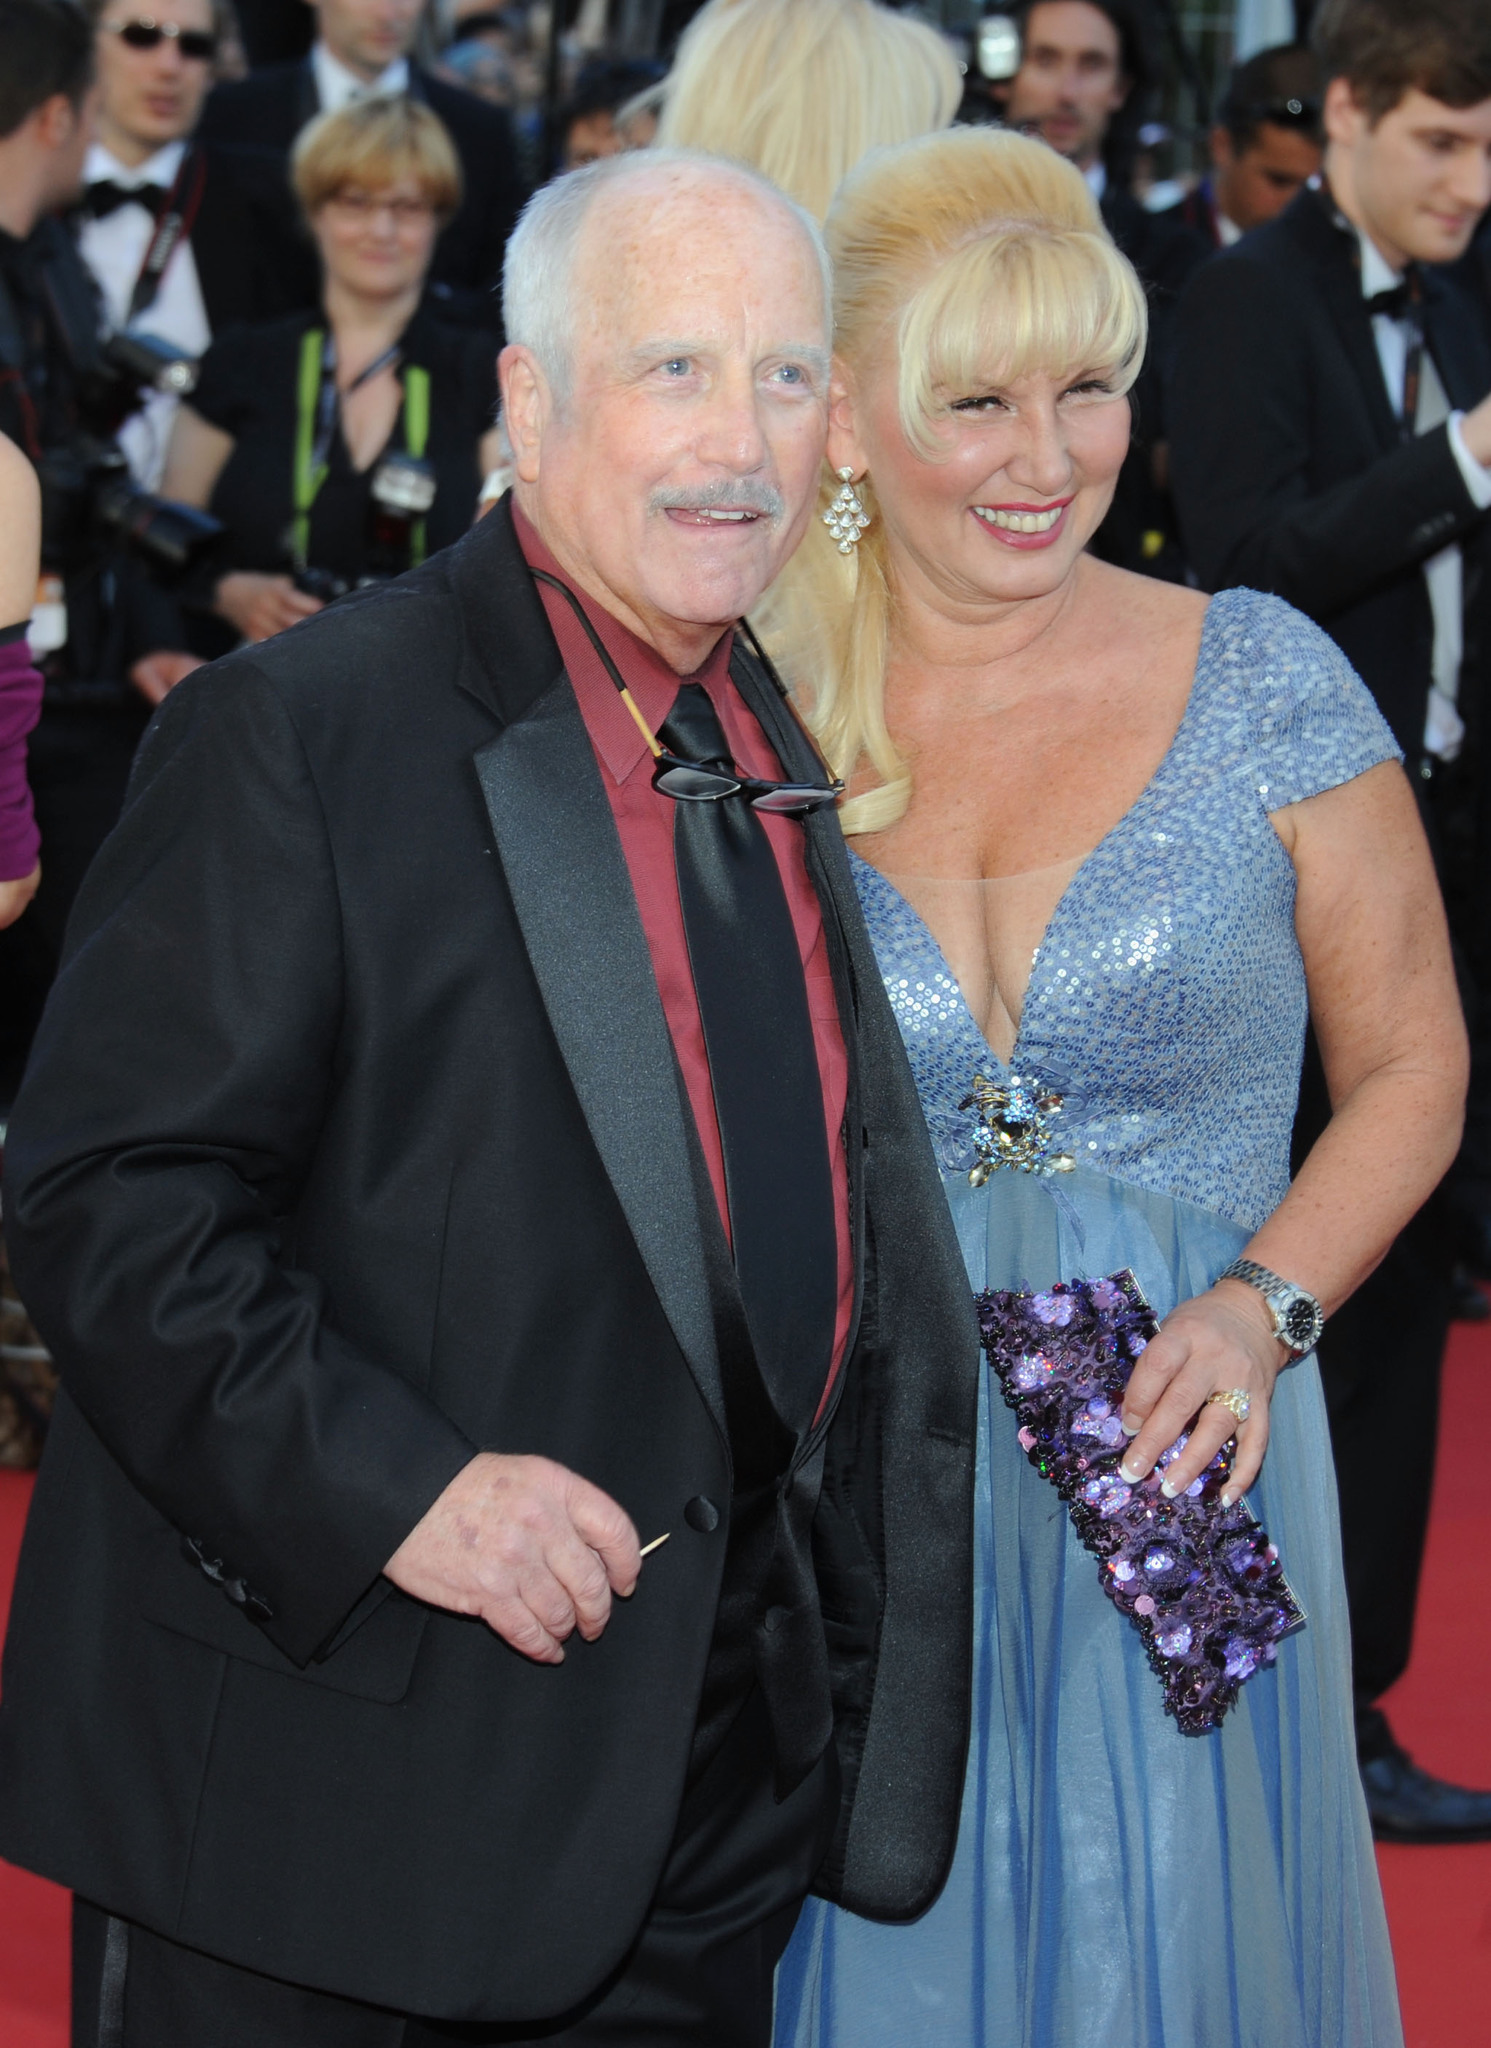 Richard Dreyfus and Svetlana Dreyfuss attend the 'Nebraska' premiere during The 66th Annual Cannes Film Festival at the Palais des Festival on May 23, 2013 in Cannes, France.